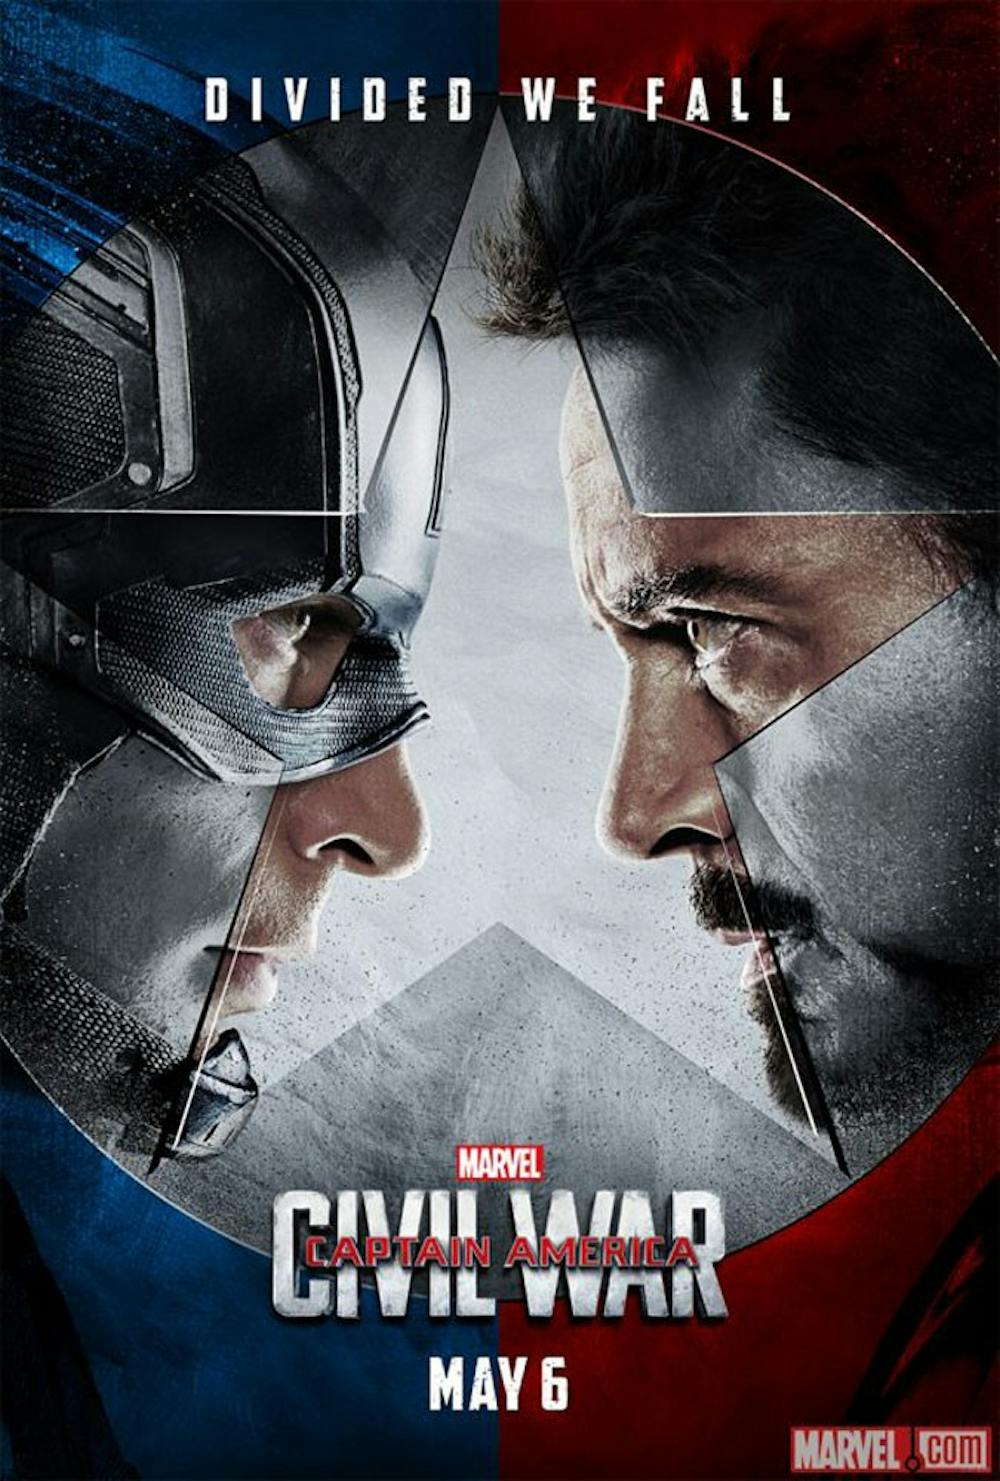 <p>“Captain America: Civil War” will appear in theaters on May 6.</p>